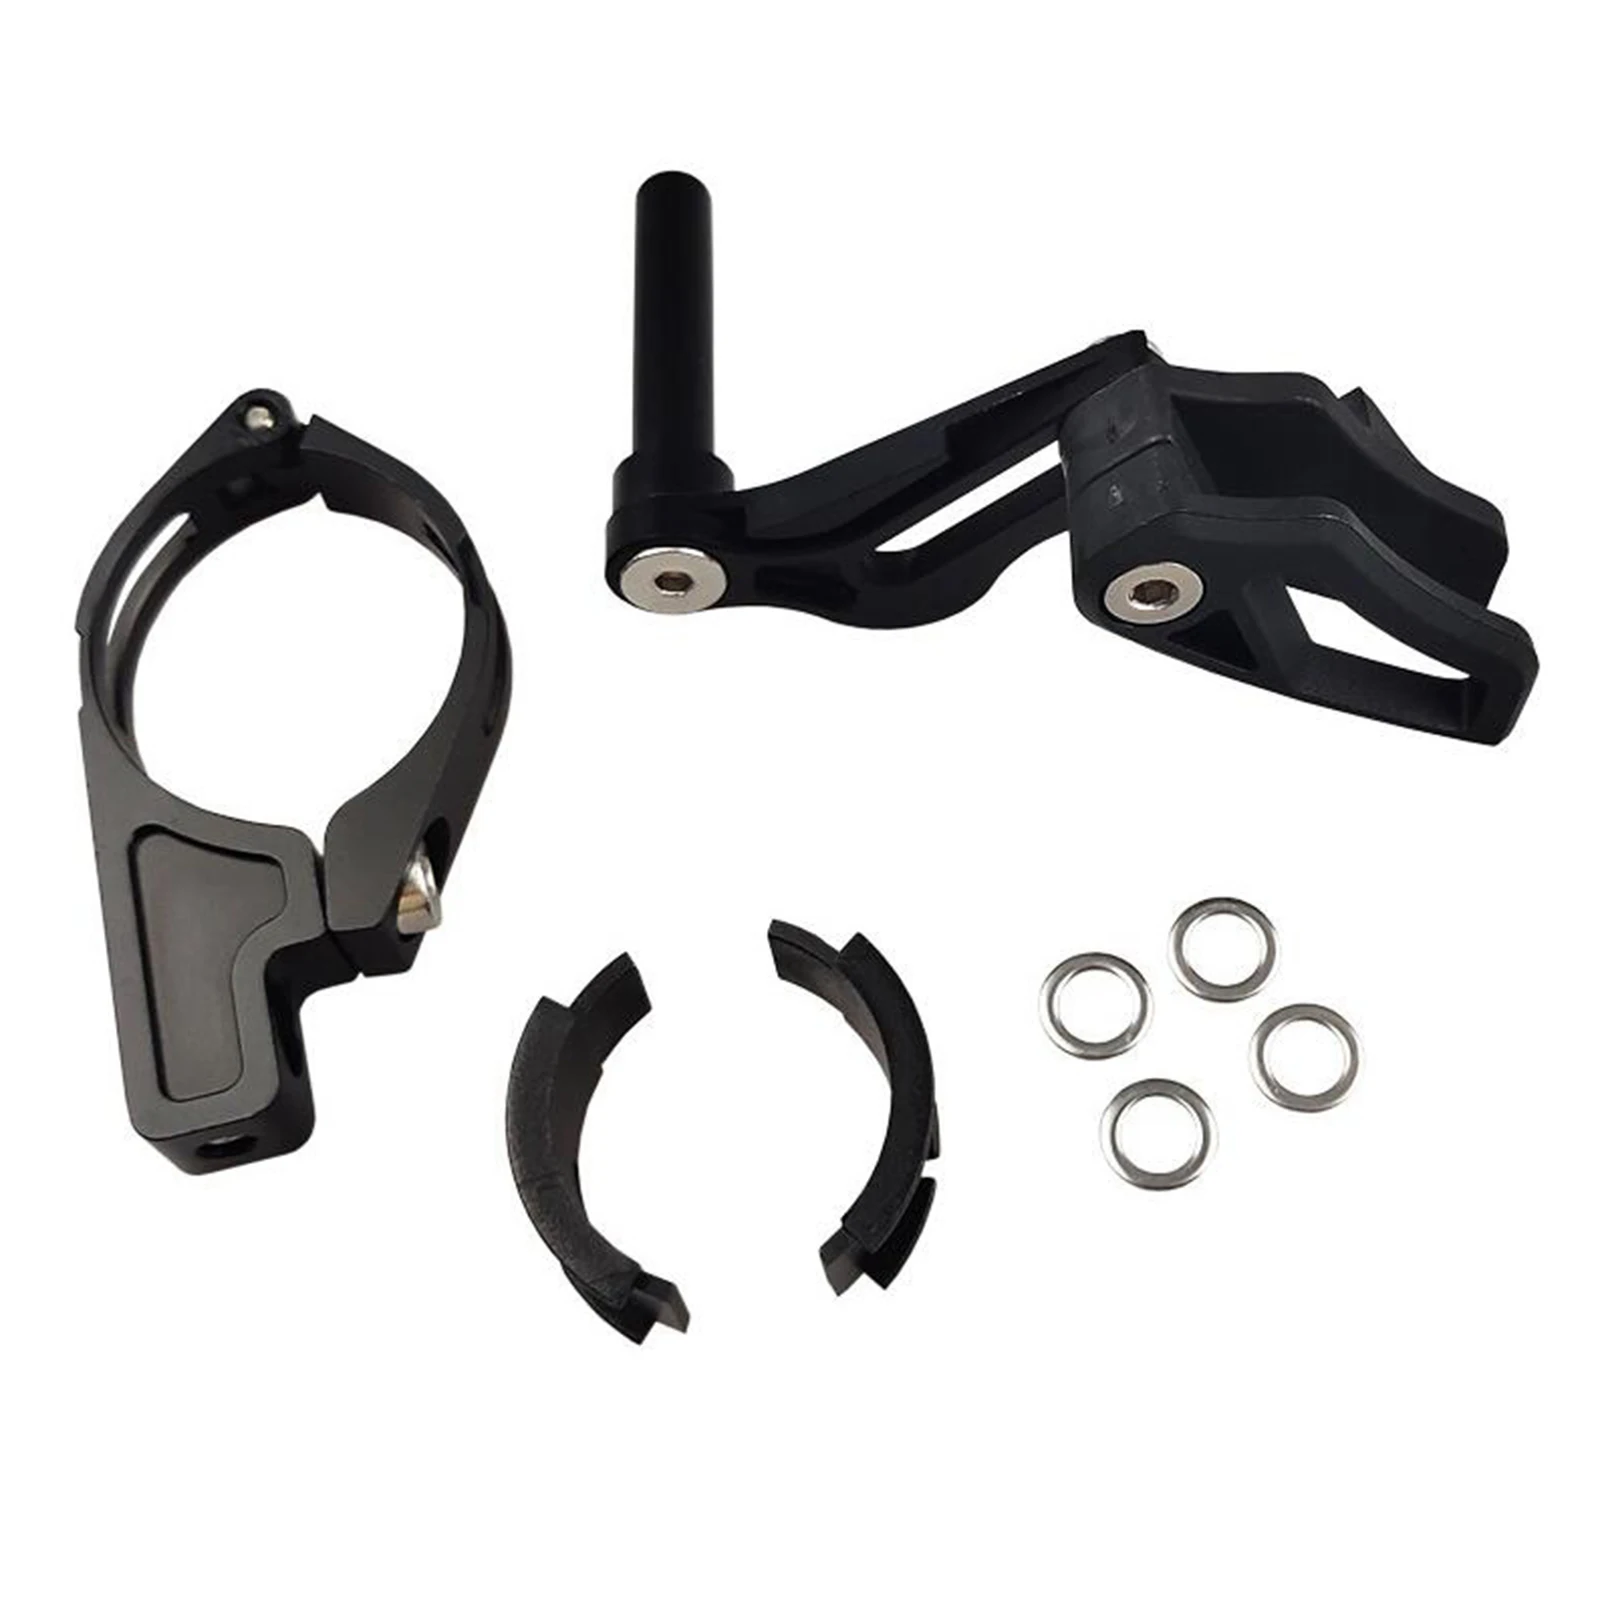 Mountain Bike Chain Guide, Clamp on (31.8-35mm) Ultralight & High Strength Aluminium Alloy Chainring Protector